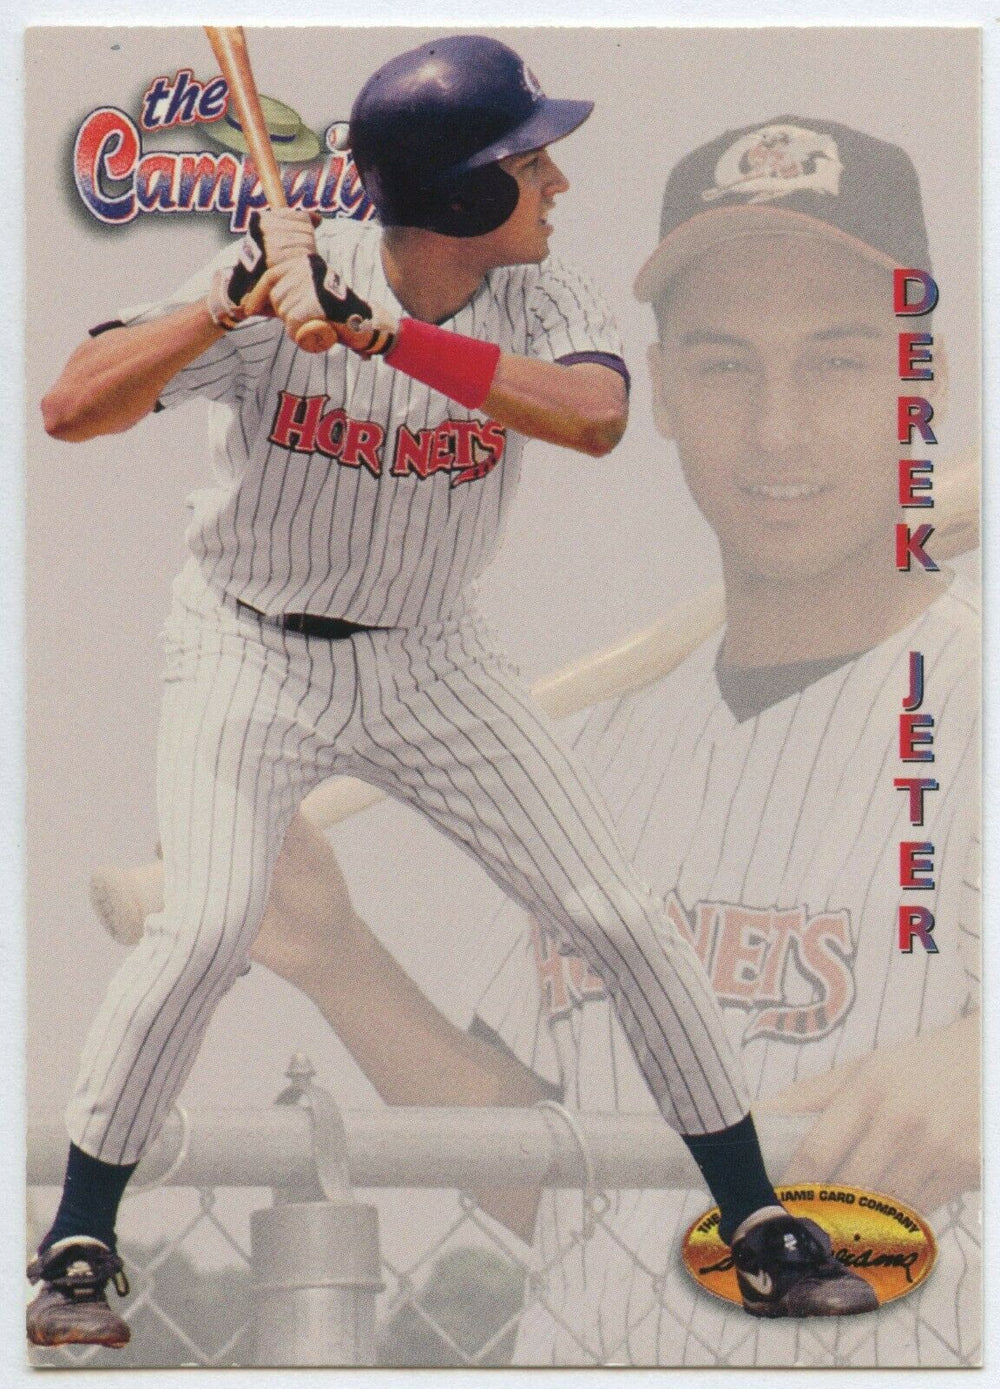 Derek Jeter 1994 Ted Williams The Campaign Series Mint Card #124